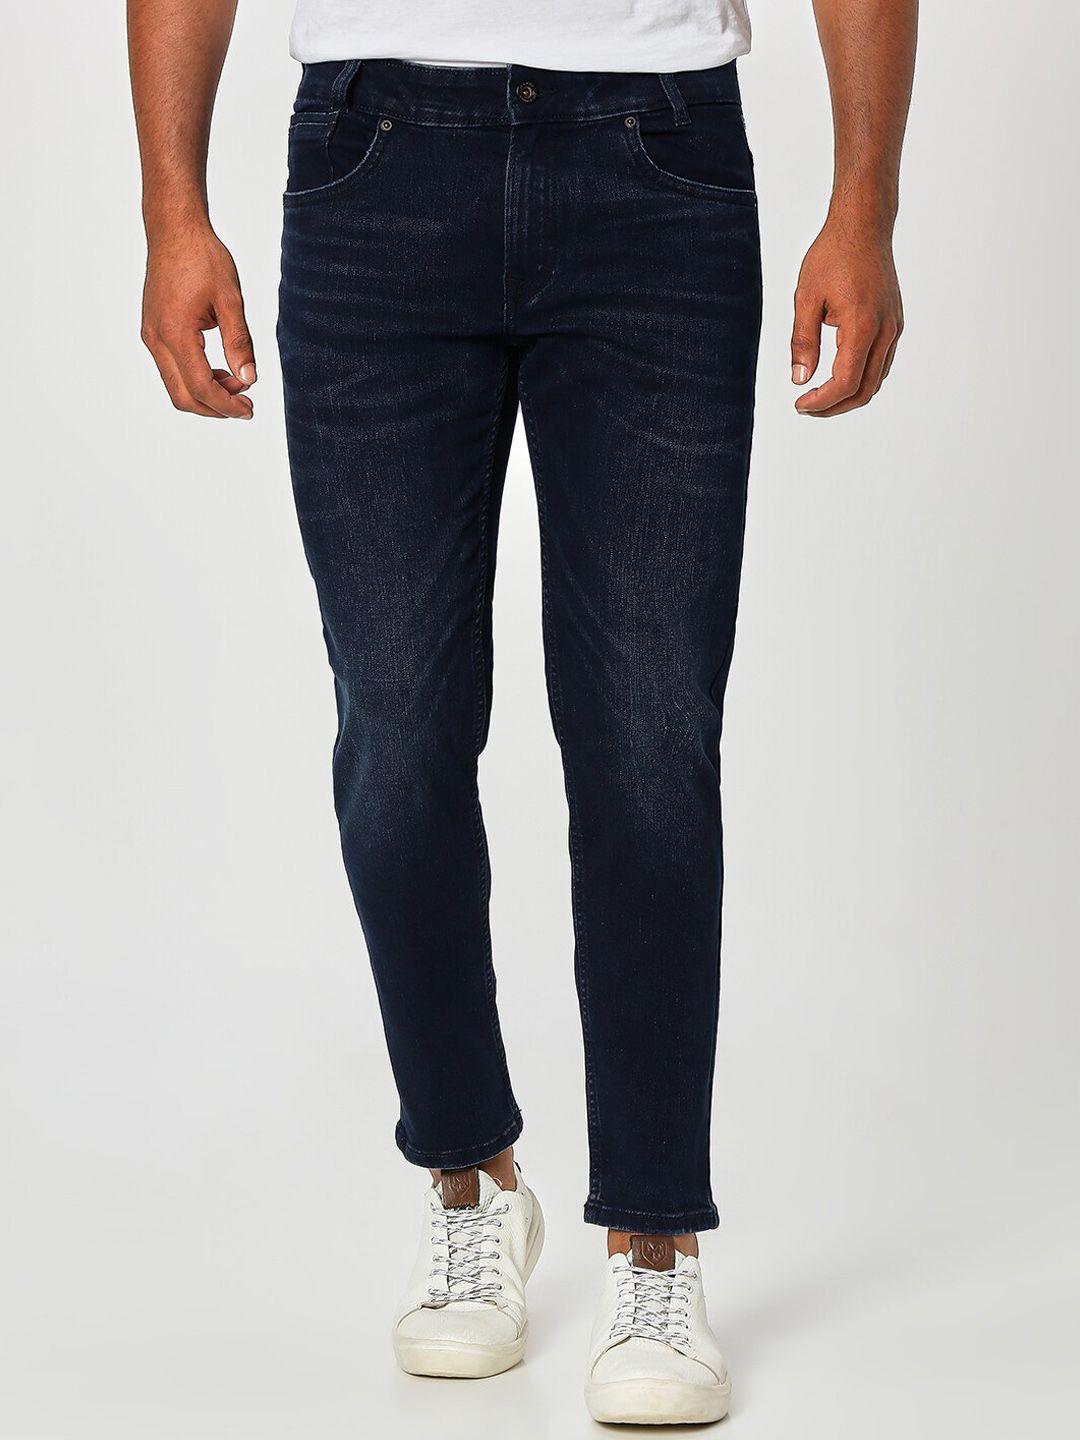 Mufti Men Tapered Fit Light Fade Stretchable Jeans